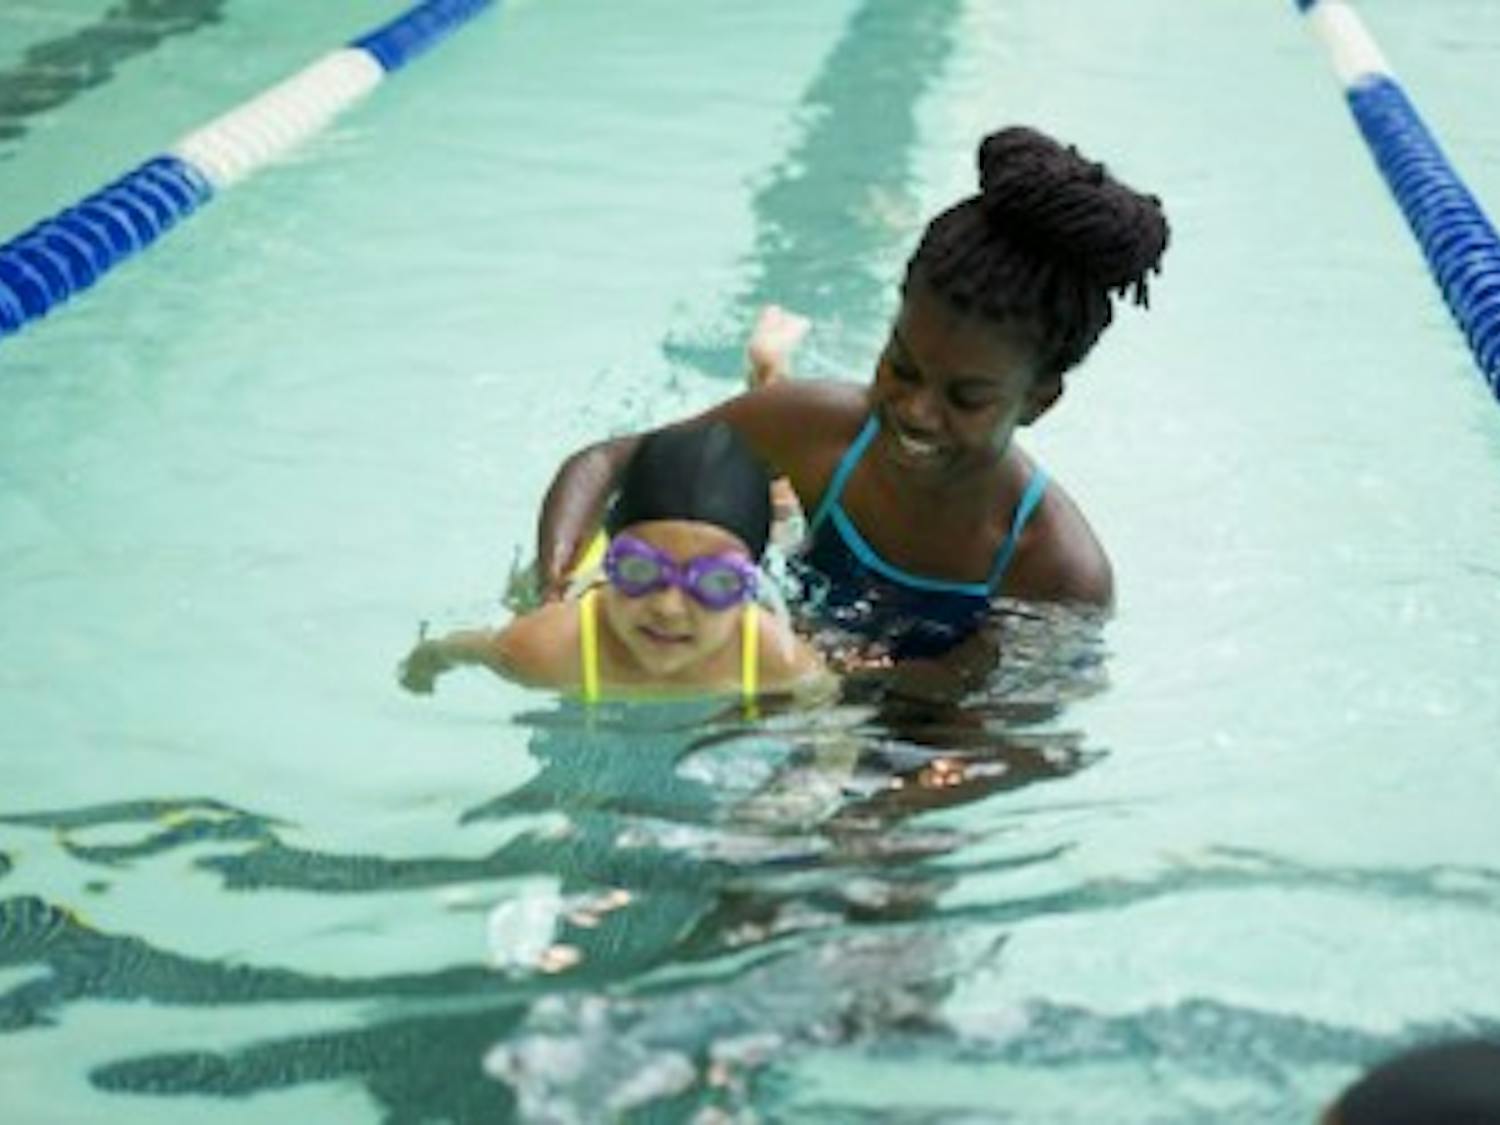 Chapel Hill volunteer, Kennedy Parkins, helps&nbsp;child swim down the lane during a lesson&nbsp;through Dive In last year at the Bowman-Gray Pool on campus.&nbsp;
&nbsp;Photos by Andrew Lee.&nbsp;Photos courtesy of Lexi Hawks, co-president of Dive In: Chapel Hill.&nbsp;&nbsp;